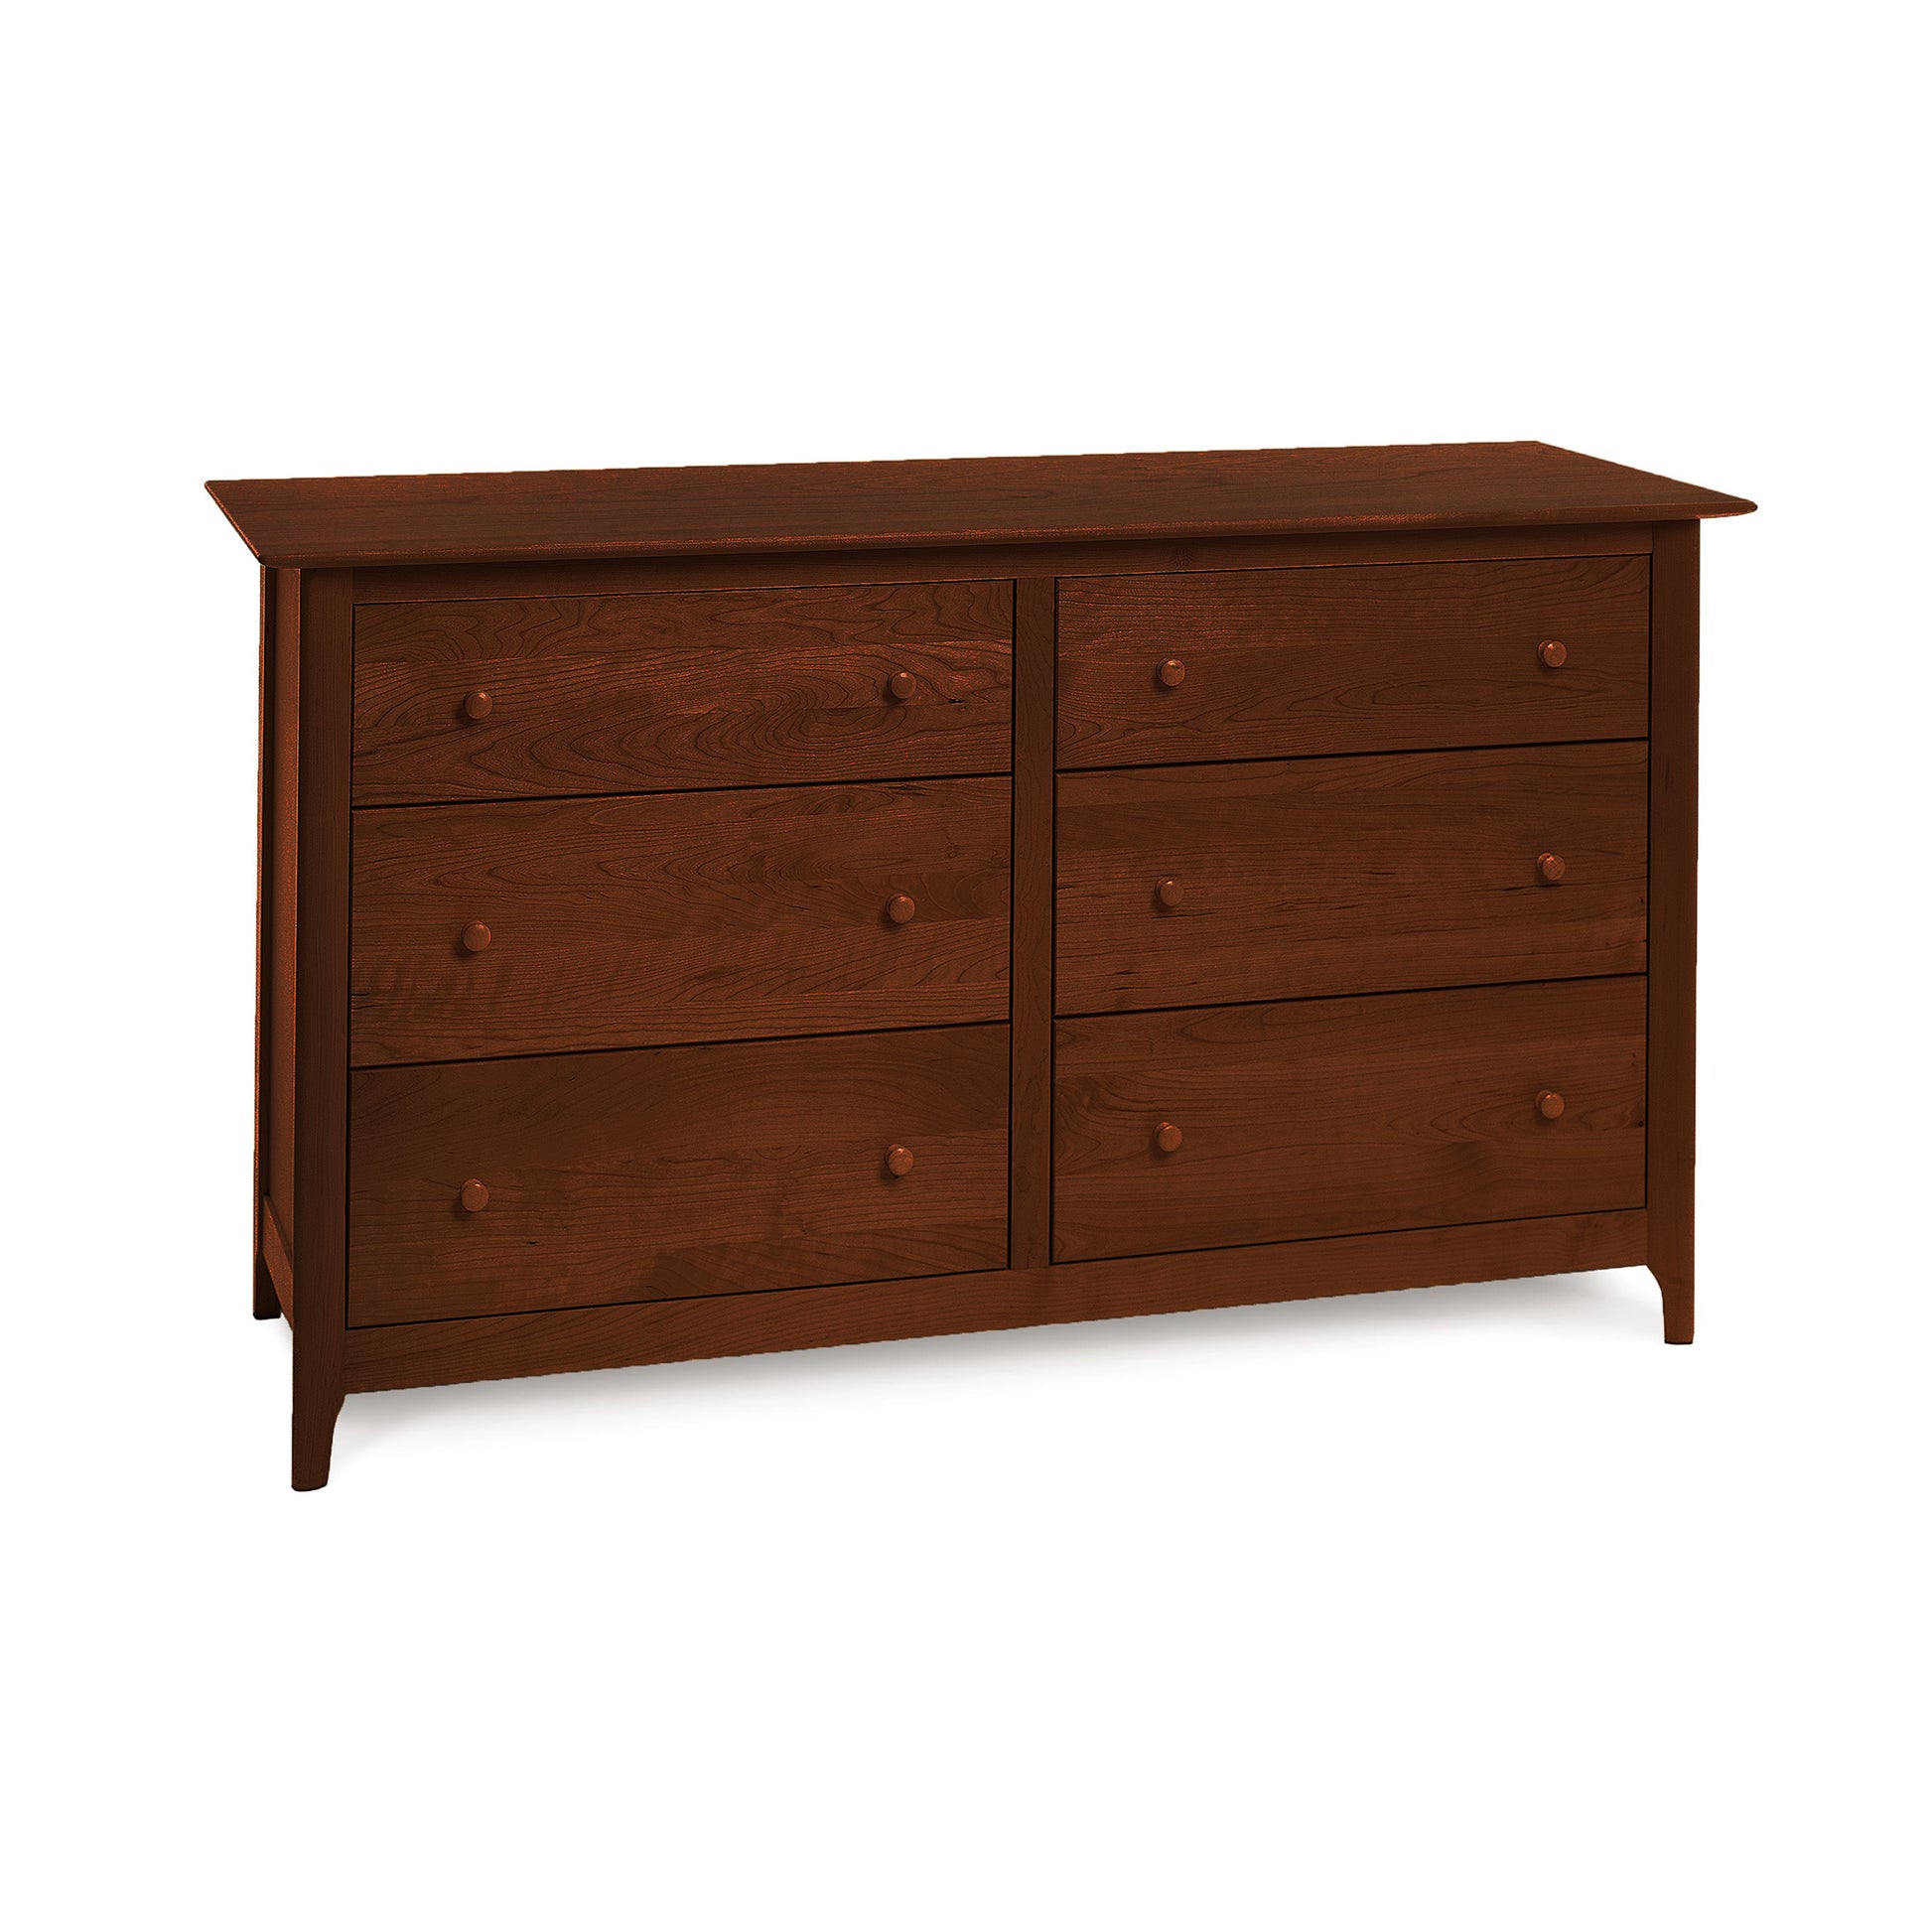 Solid wood Sarah 6-Drawer Dresser by Copeland Furniture, isolated on a white background.